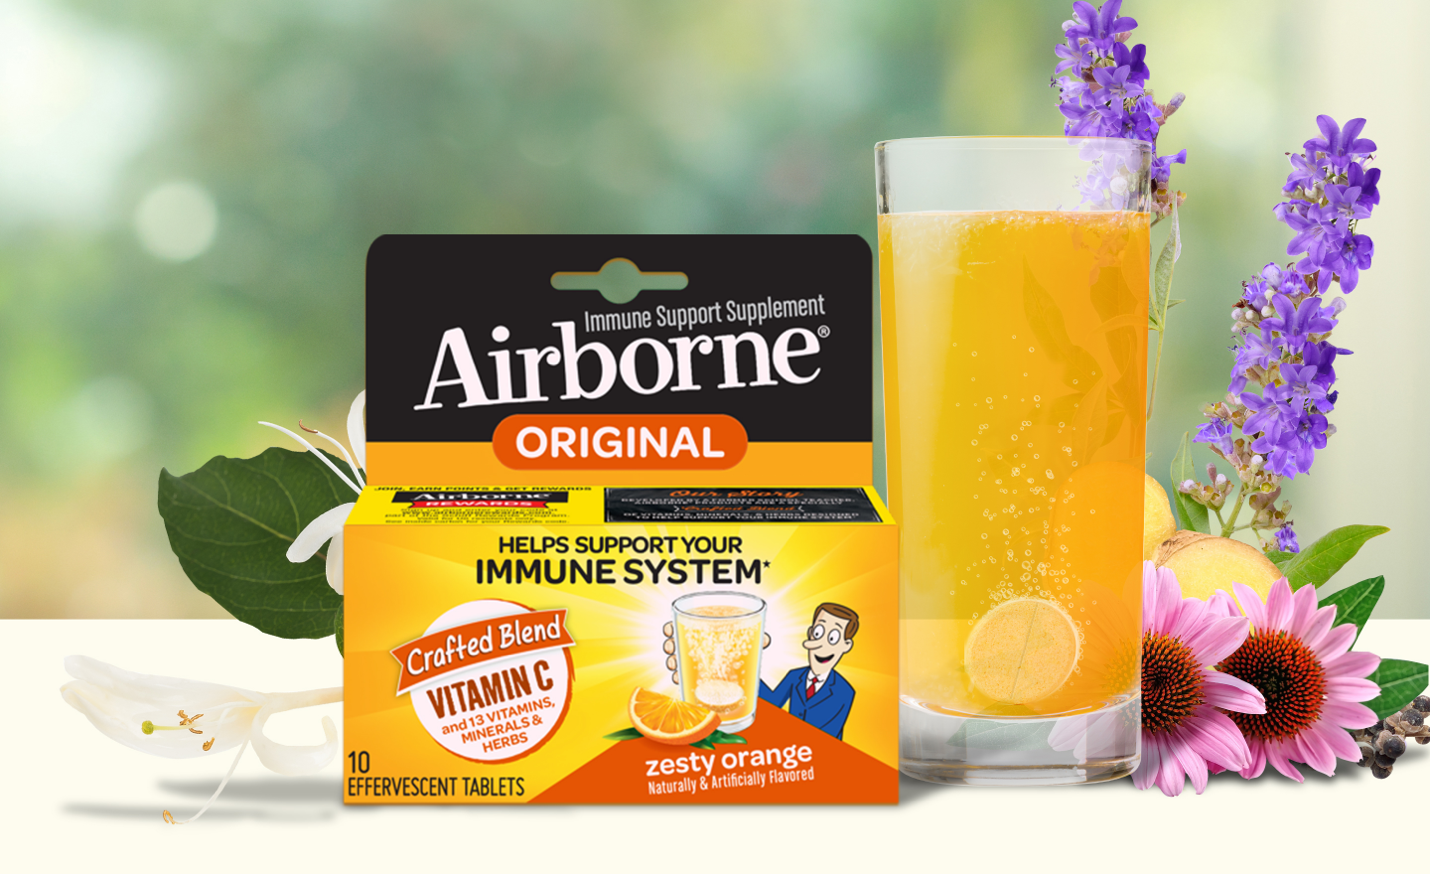 How to take Airborne effervescent immune support tablets